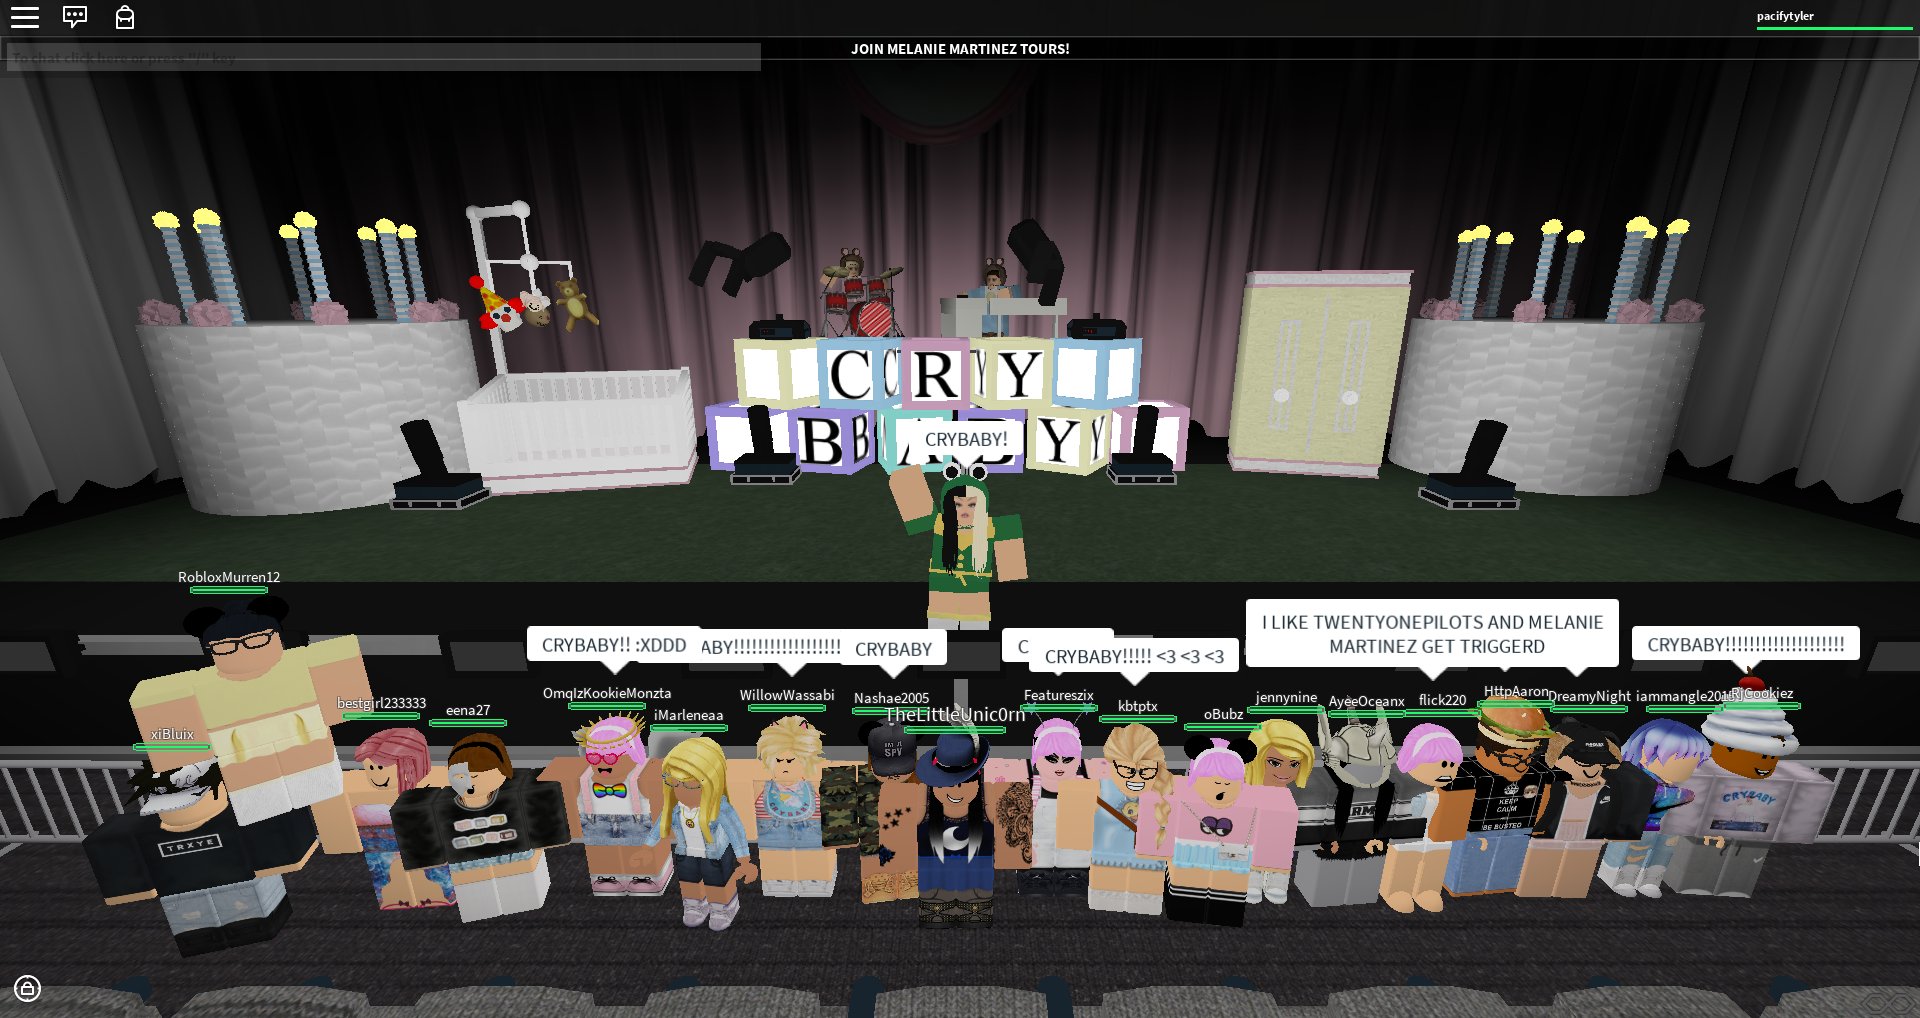 Melanie Martinez On Twitter Shows Have Been Amazing So Far Can T Wait To Keep This Tour Going And Meet Many More Beautiful Faces Mm - melanie martinez the cry baby tour roblox